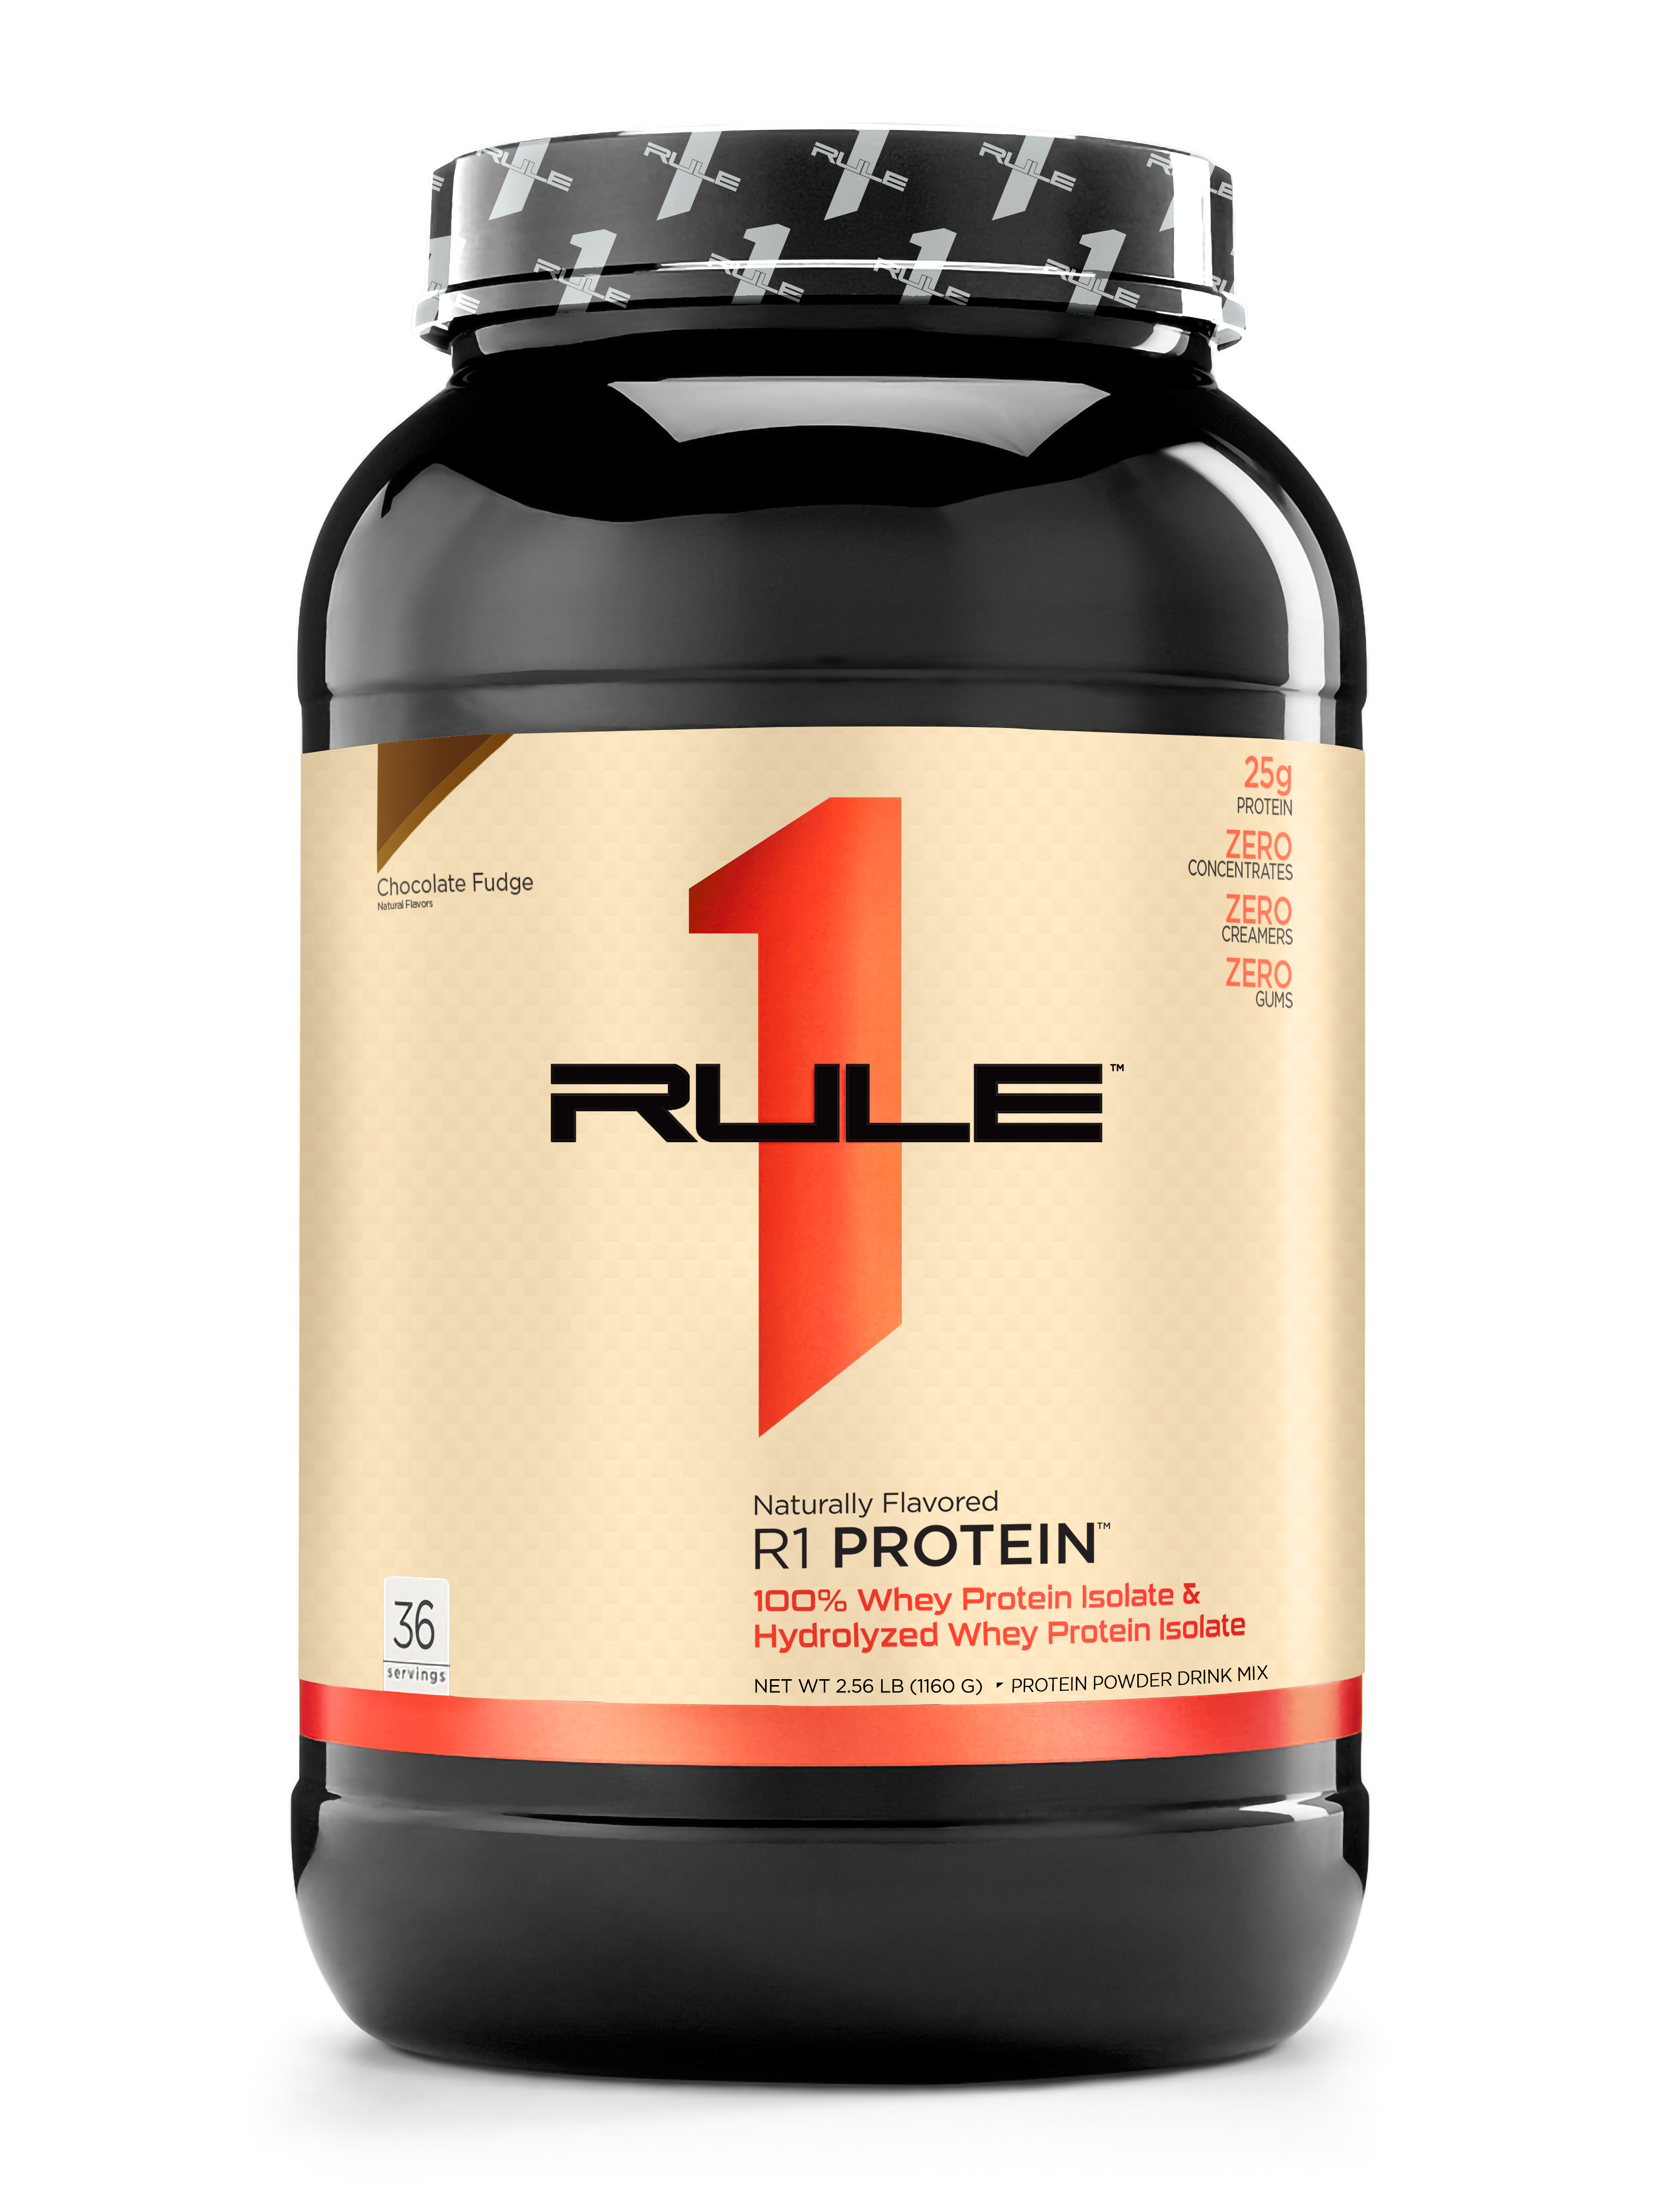 R1 Protein Naturally Flavored - Super Nutrition